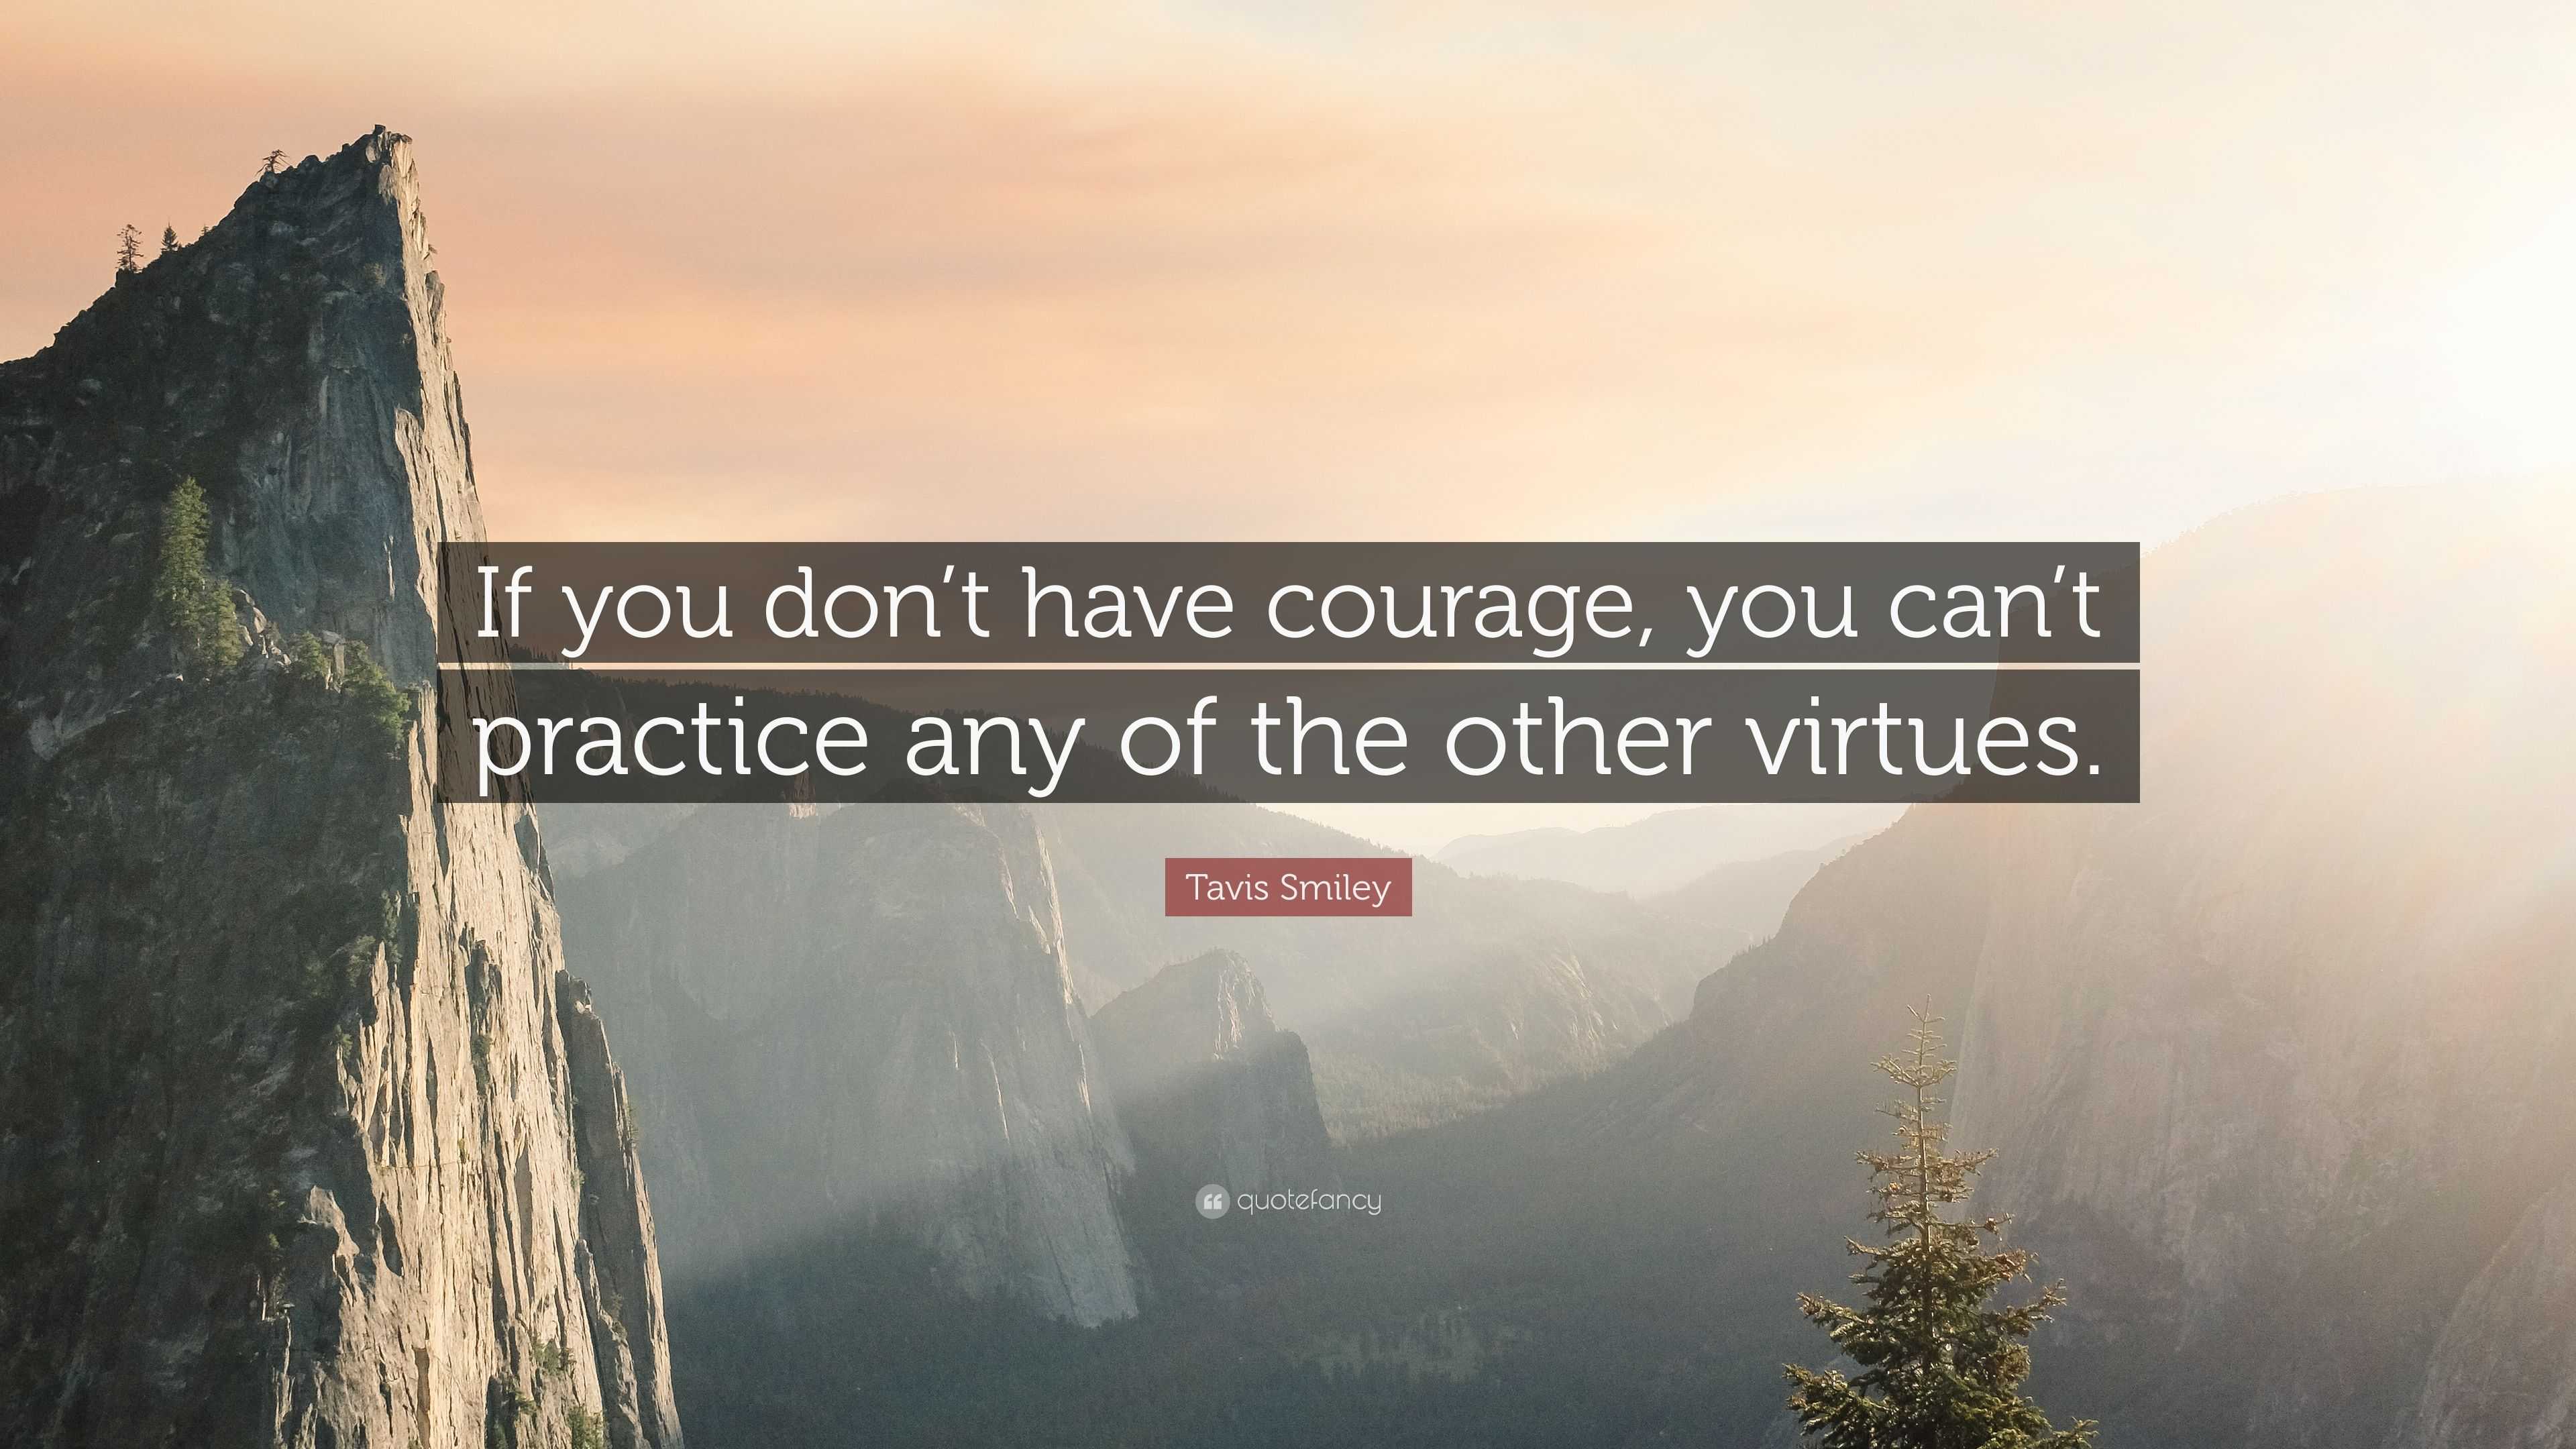 Tavis Smiley Quote: “If you don’t have courage, you can’t practice any ...